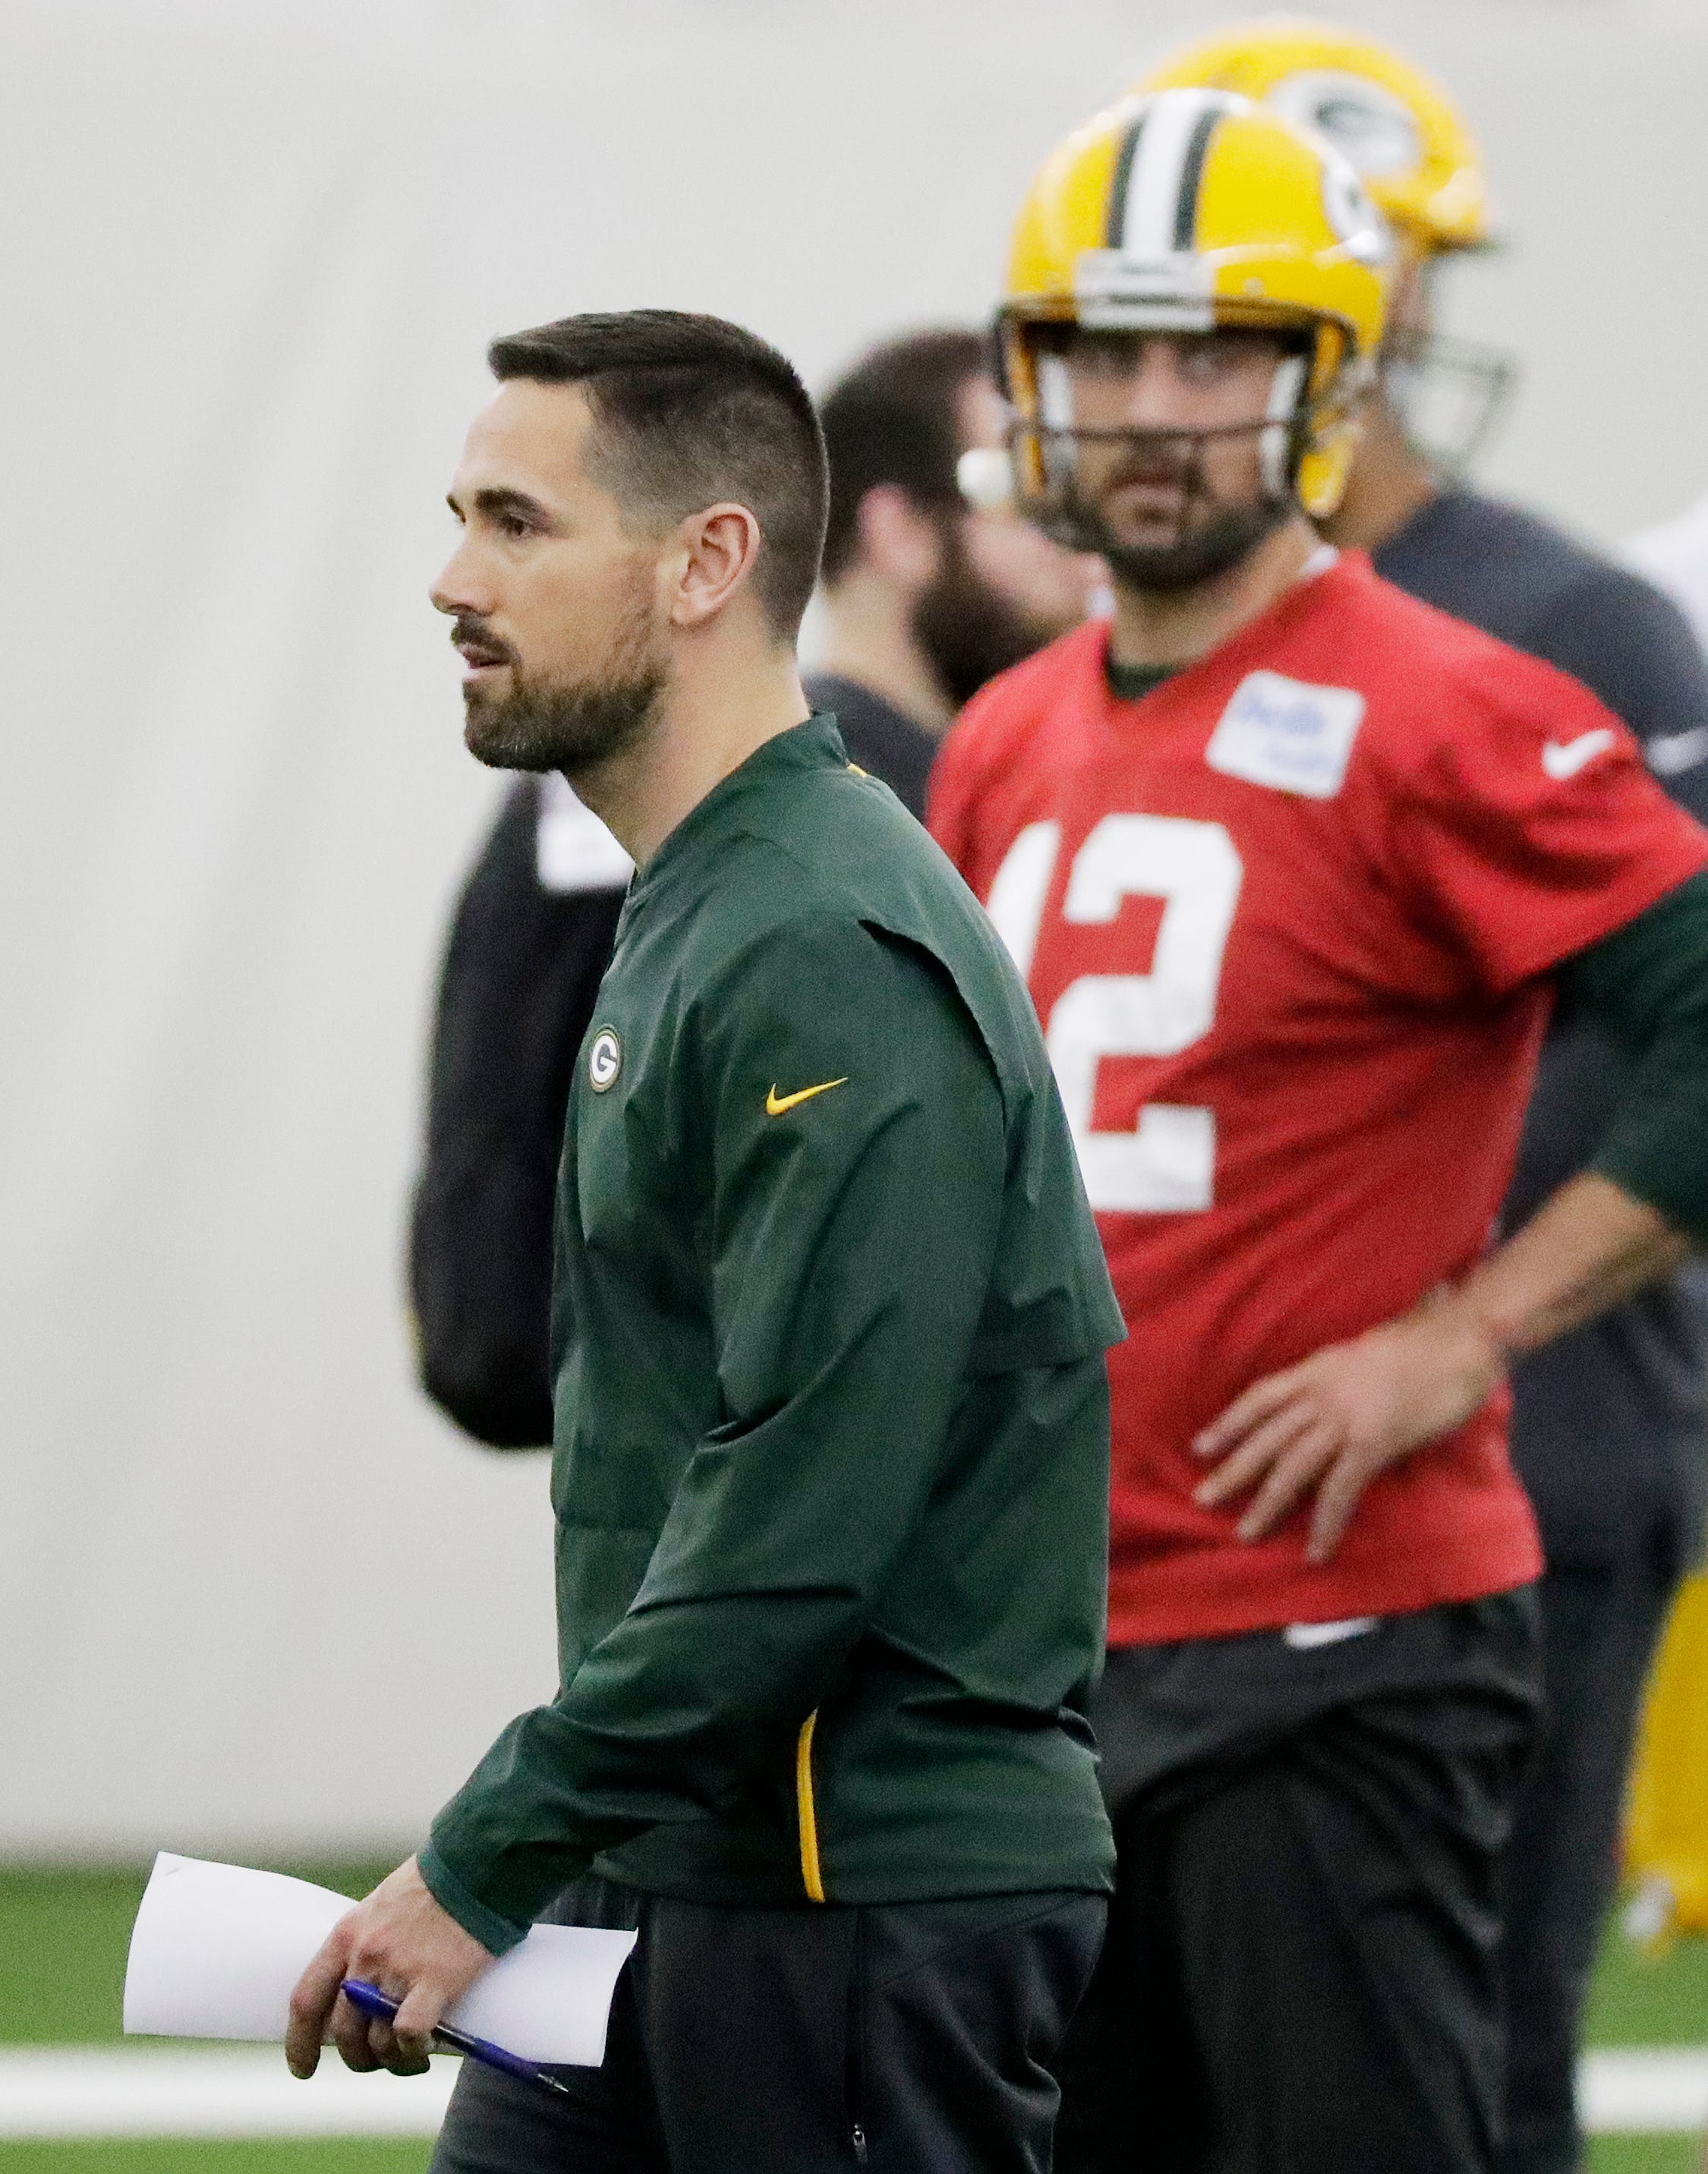 Green Bay Packers head coach Matt LaFleur during a team practice at the Don Hutson Center on Wednesday, April 24, 2019 in Ashwaubenon, Wis.